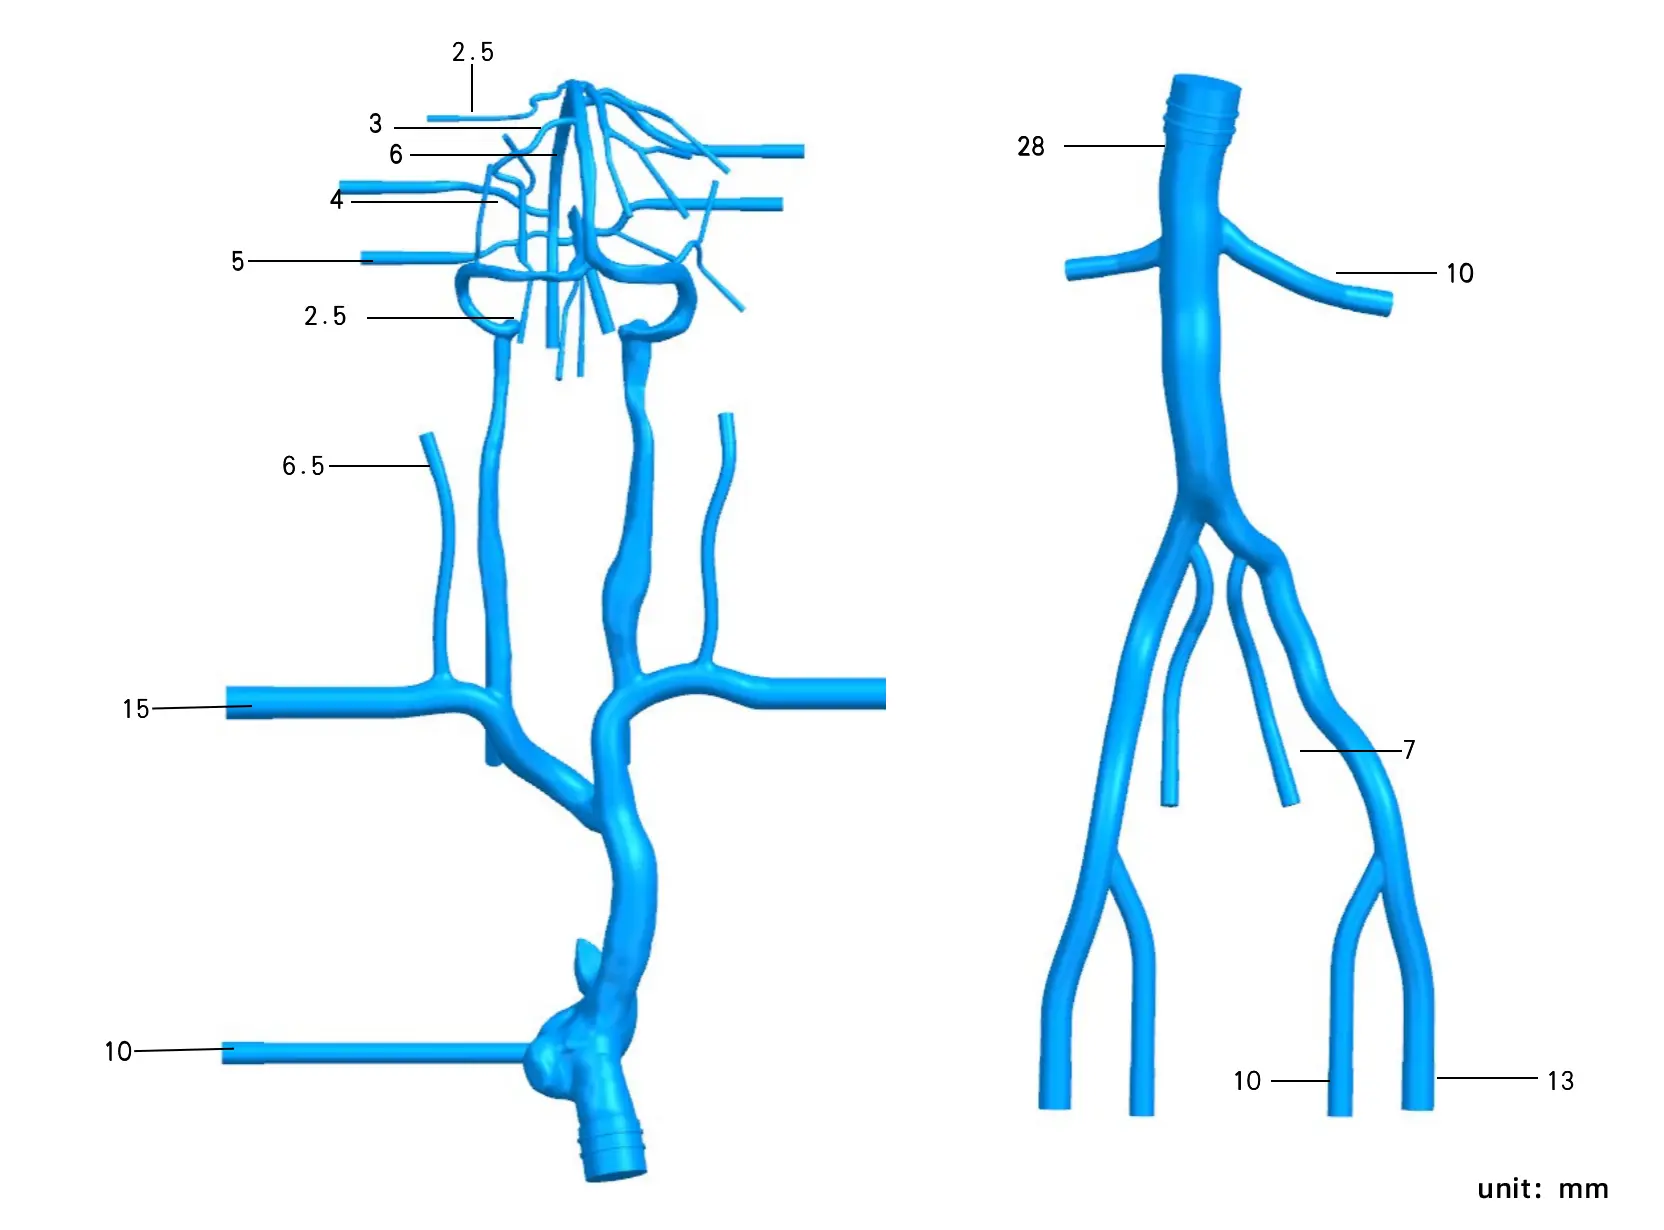 Drawing of Intracranial Femoral Vein Model